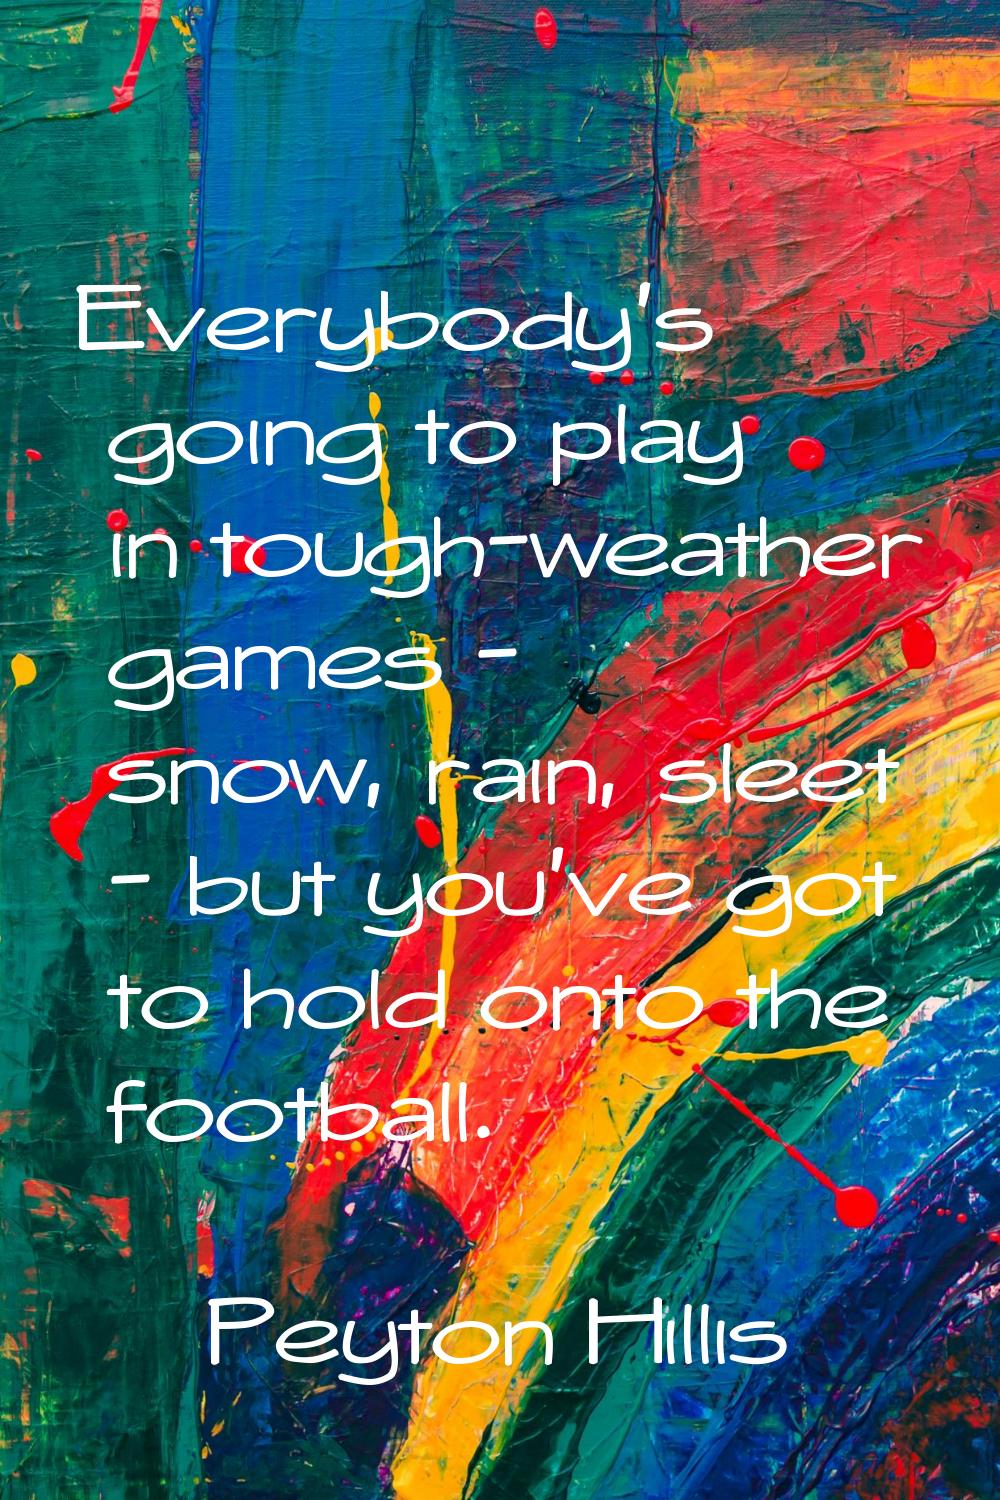 Everybody's going to play in tough-weather games - snow, rain, sleet - but you've got to hold onto 